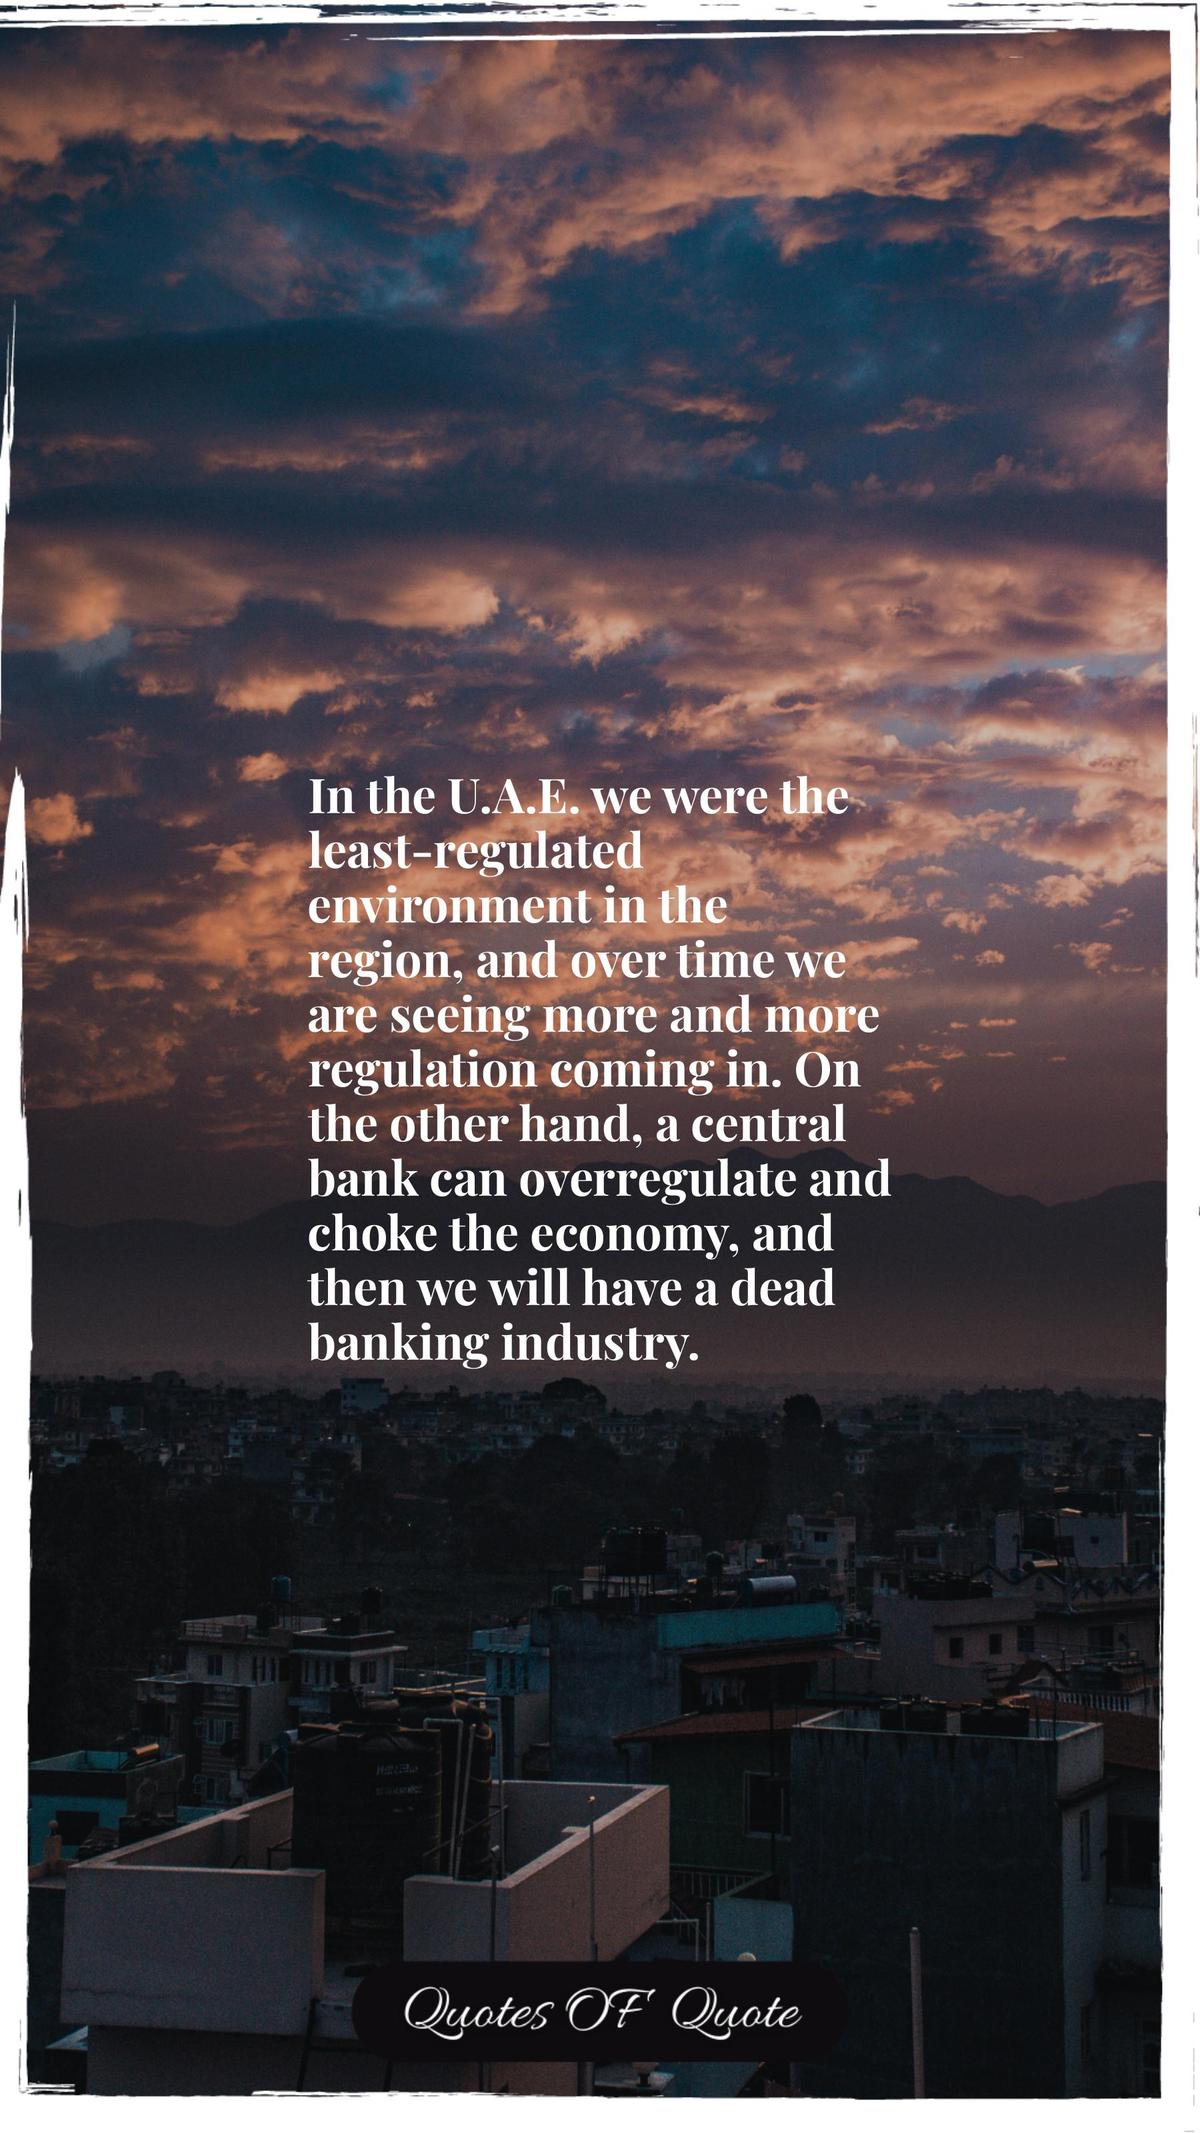 In the U.A.E. we were the least-regulated environment in the region, and over time we are seeing more and more regulation coming in. On the other hand, a central bank can overregulate and choke the economy, and then we will have a dead banking industry.